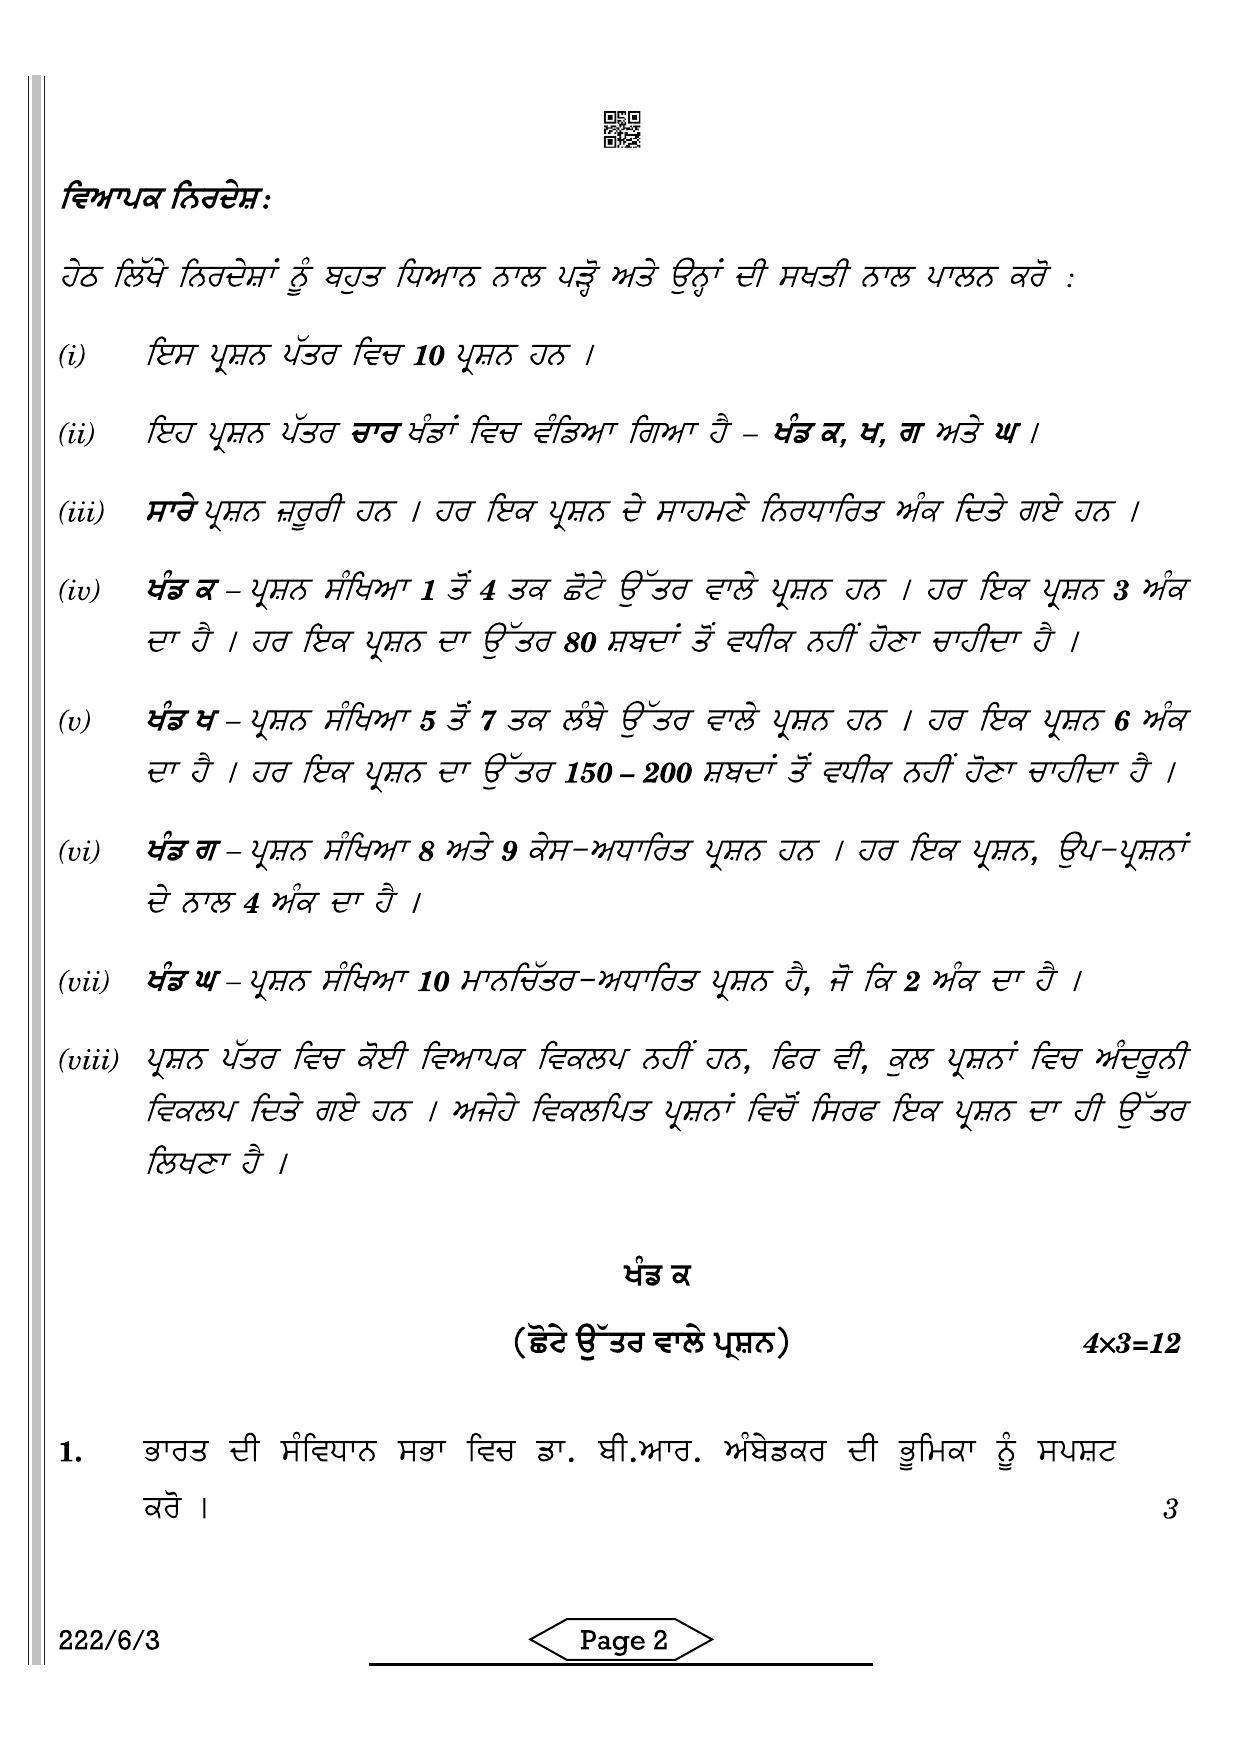 CBSE Class 12 222-6-3 History Punjabi 2022 Compartment Question Paper - Page 2